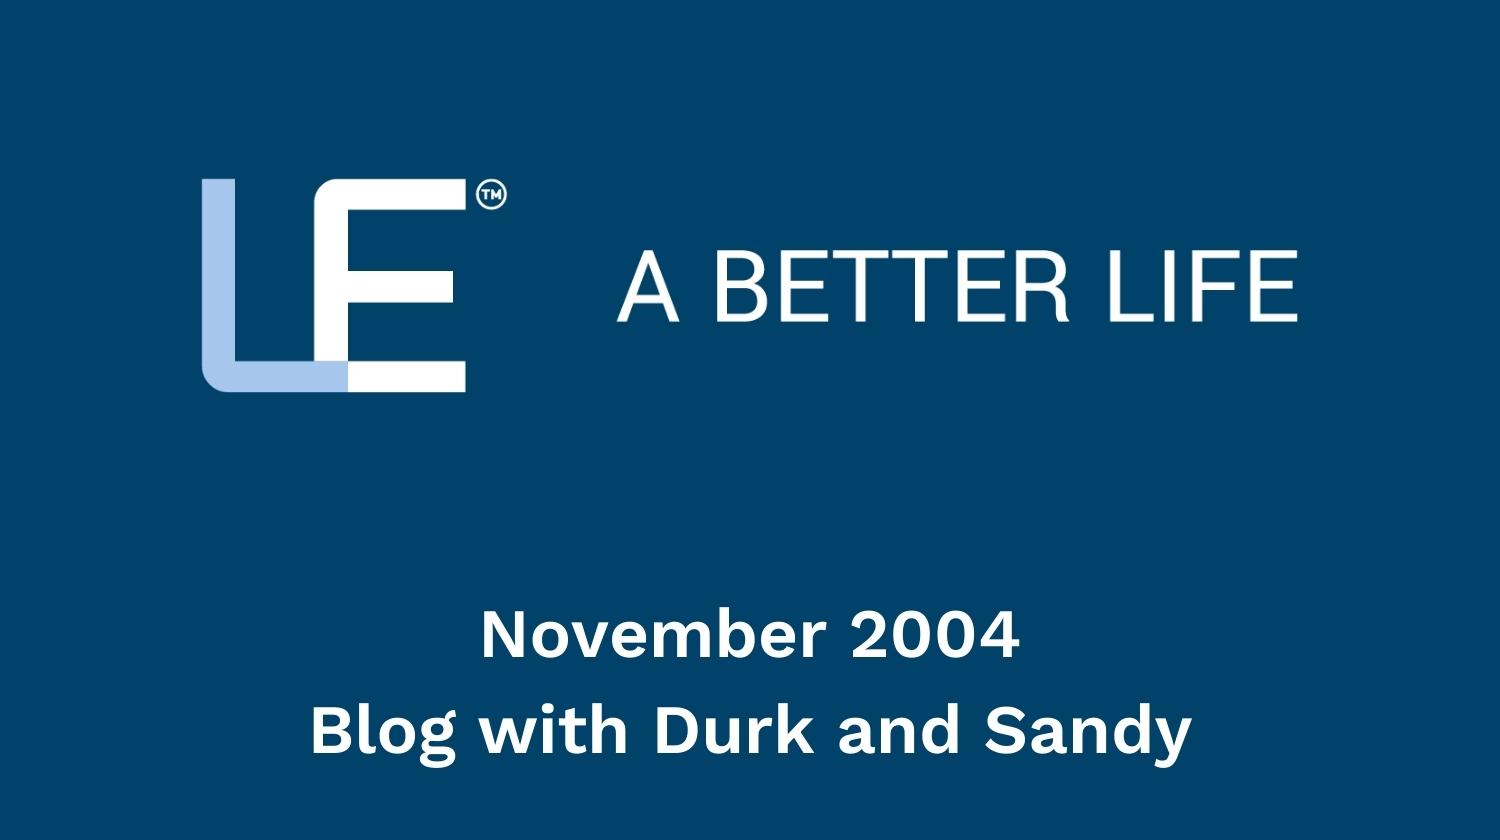 November 2004 Blog with Durk and Sandy